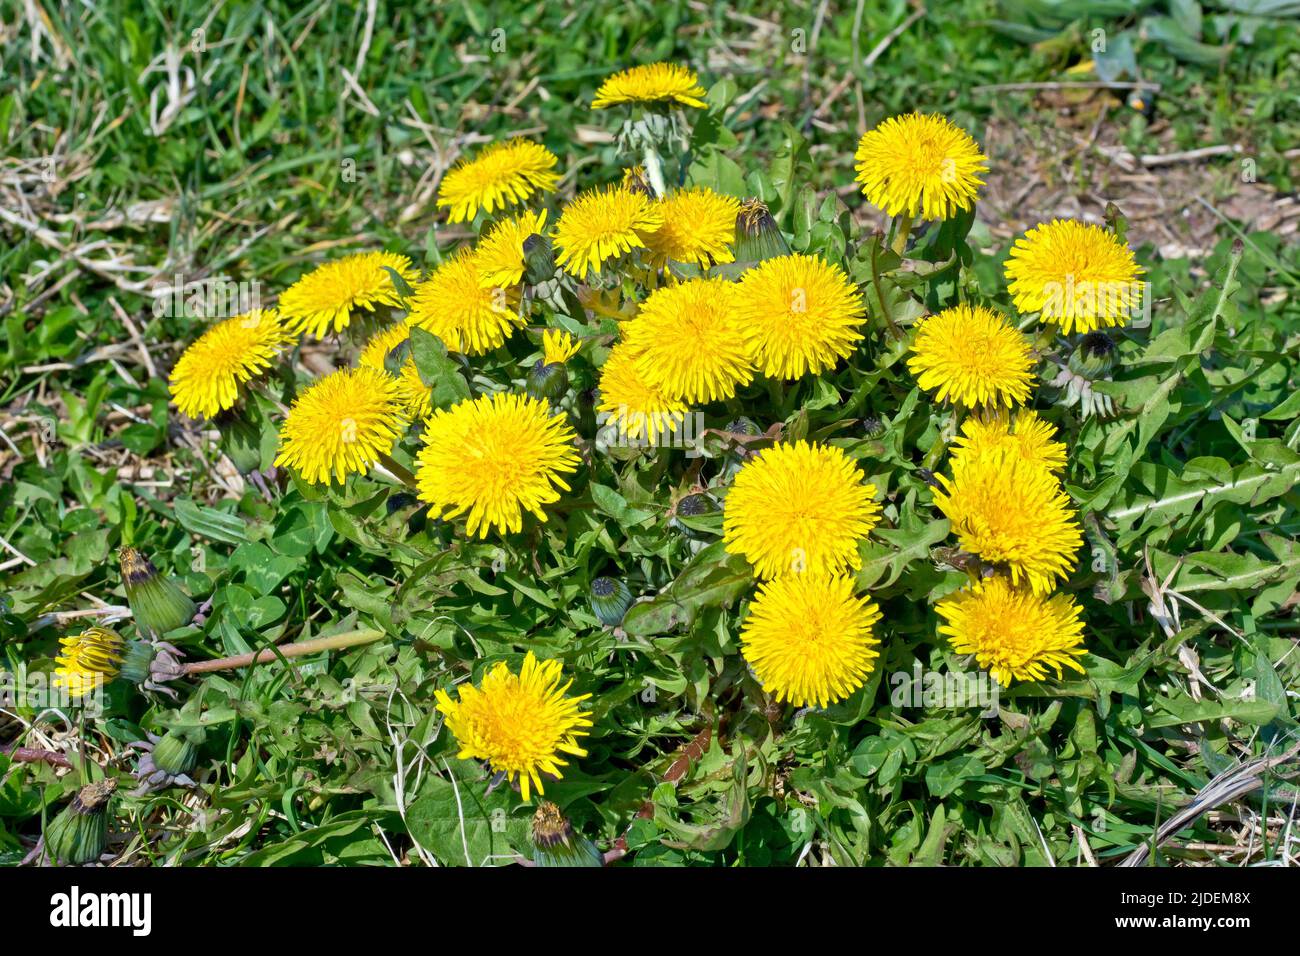 Dandelions (taraxacum officinalis), close up of a large cluster of the common bright yellow wild flower growing on a piece of rough ground. Stock Photo